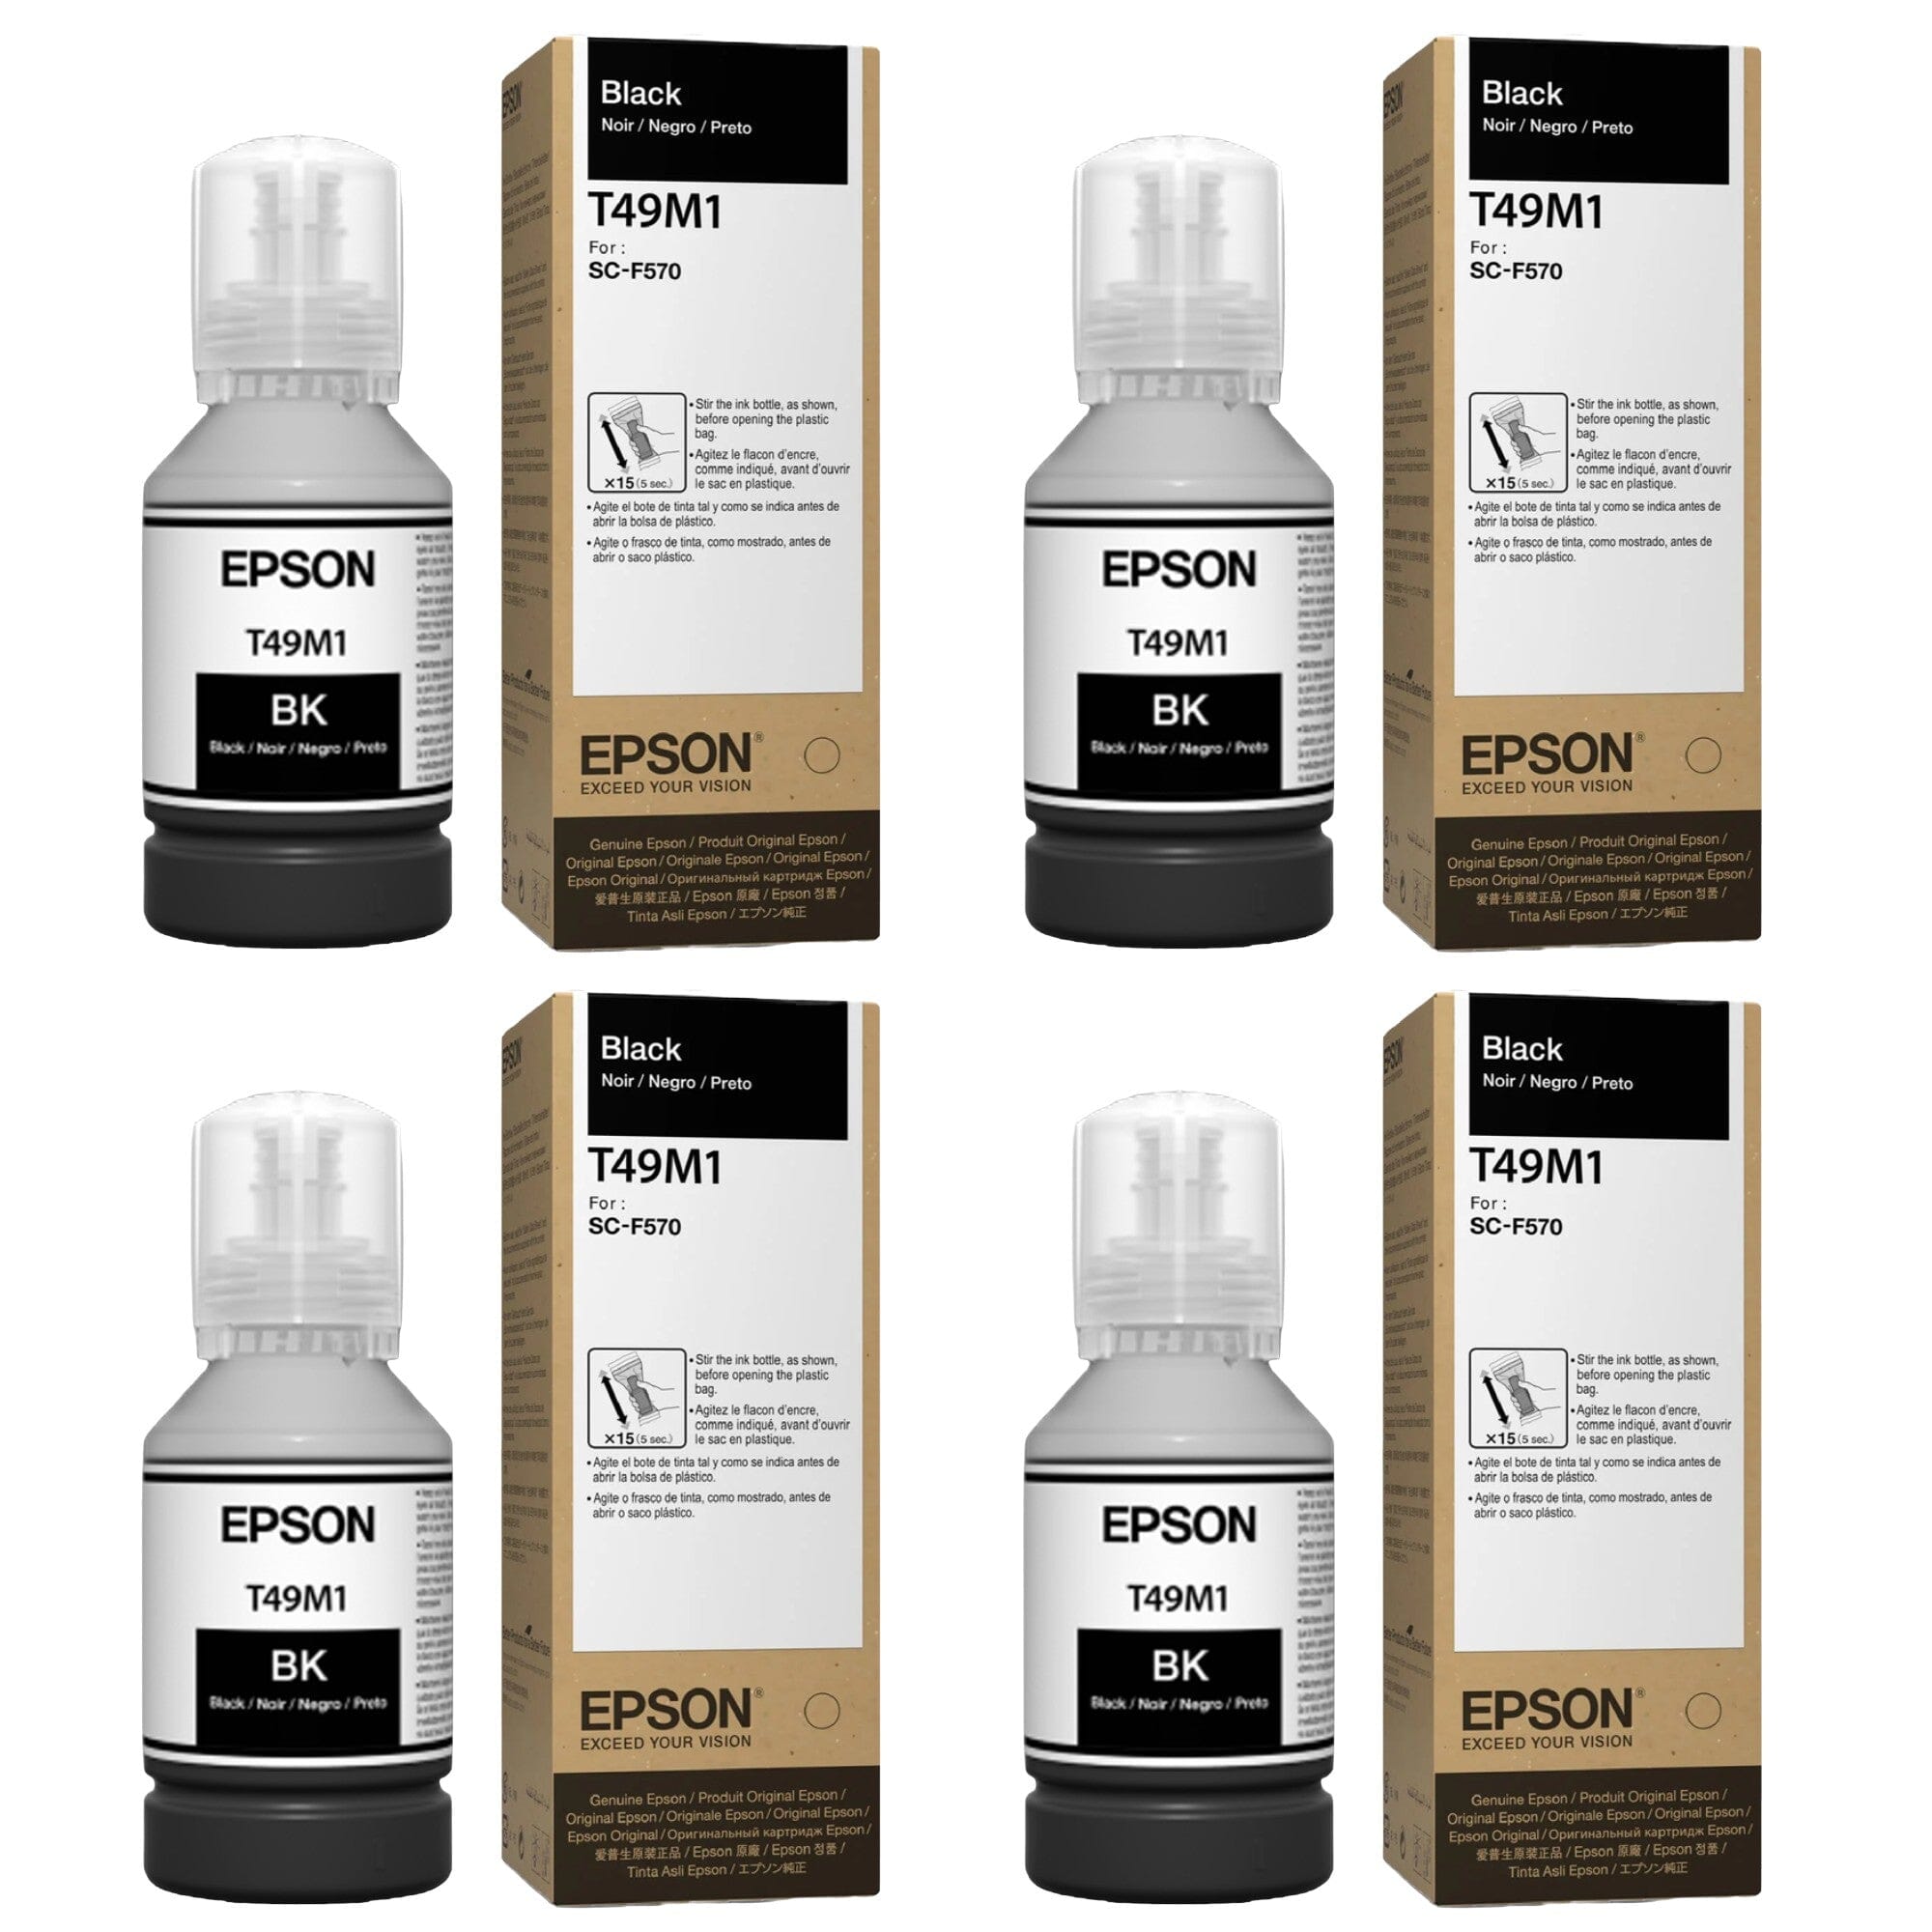 Epson Ink Set For F170 & F570 - 4 Pack with 200 Sheets of Epson Paper